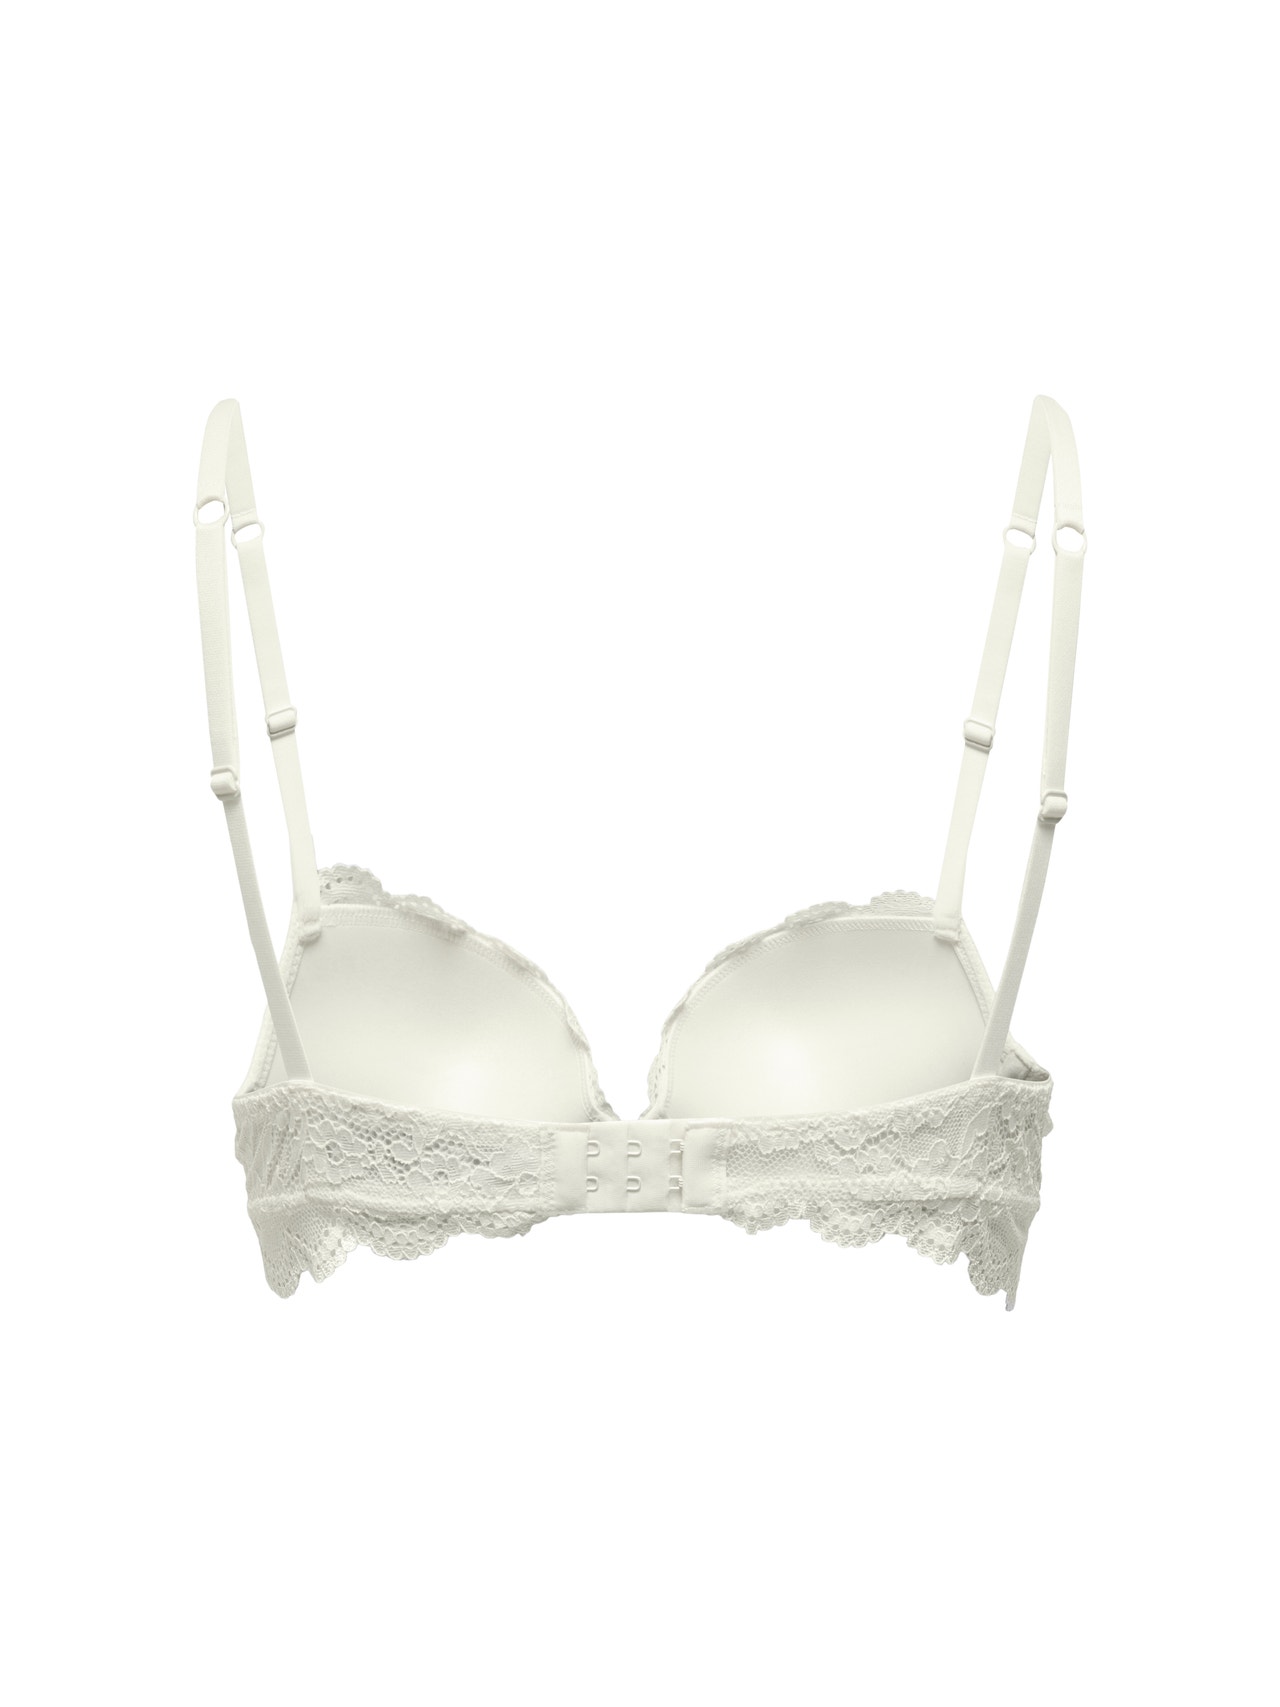 https://images.only.com/15283597/4124423/002/only-lacepush-upbra-white.jpg?v=48ed65e6b70529834d81db52a1ee325e&format=webp&width=1280&quality=90&key=25-0-3